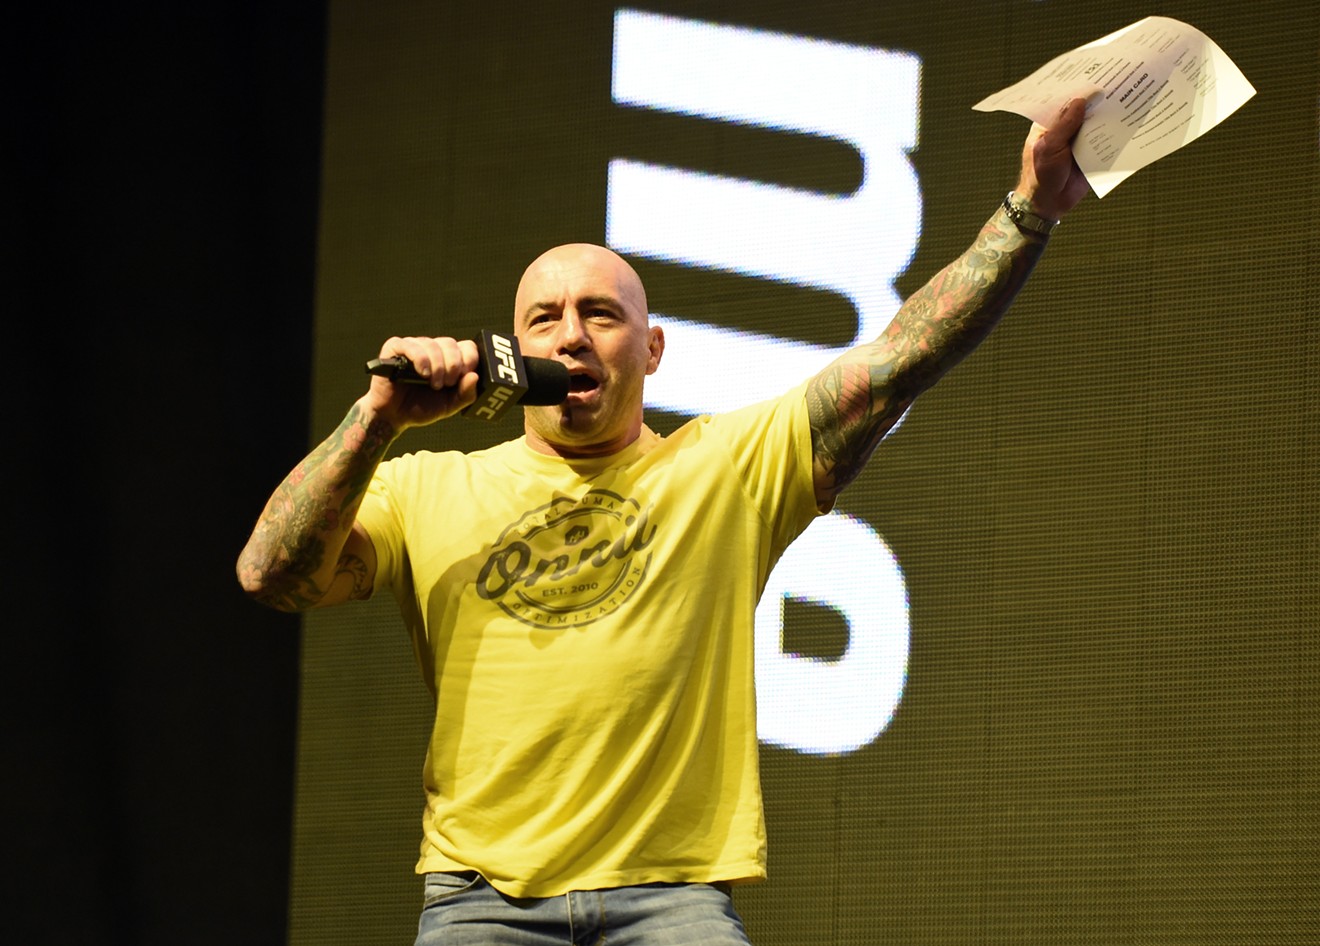 Will Joe Rogan wear cowboy boots now that he's moved to Texas?